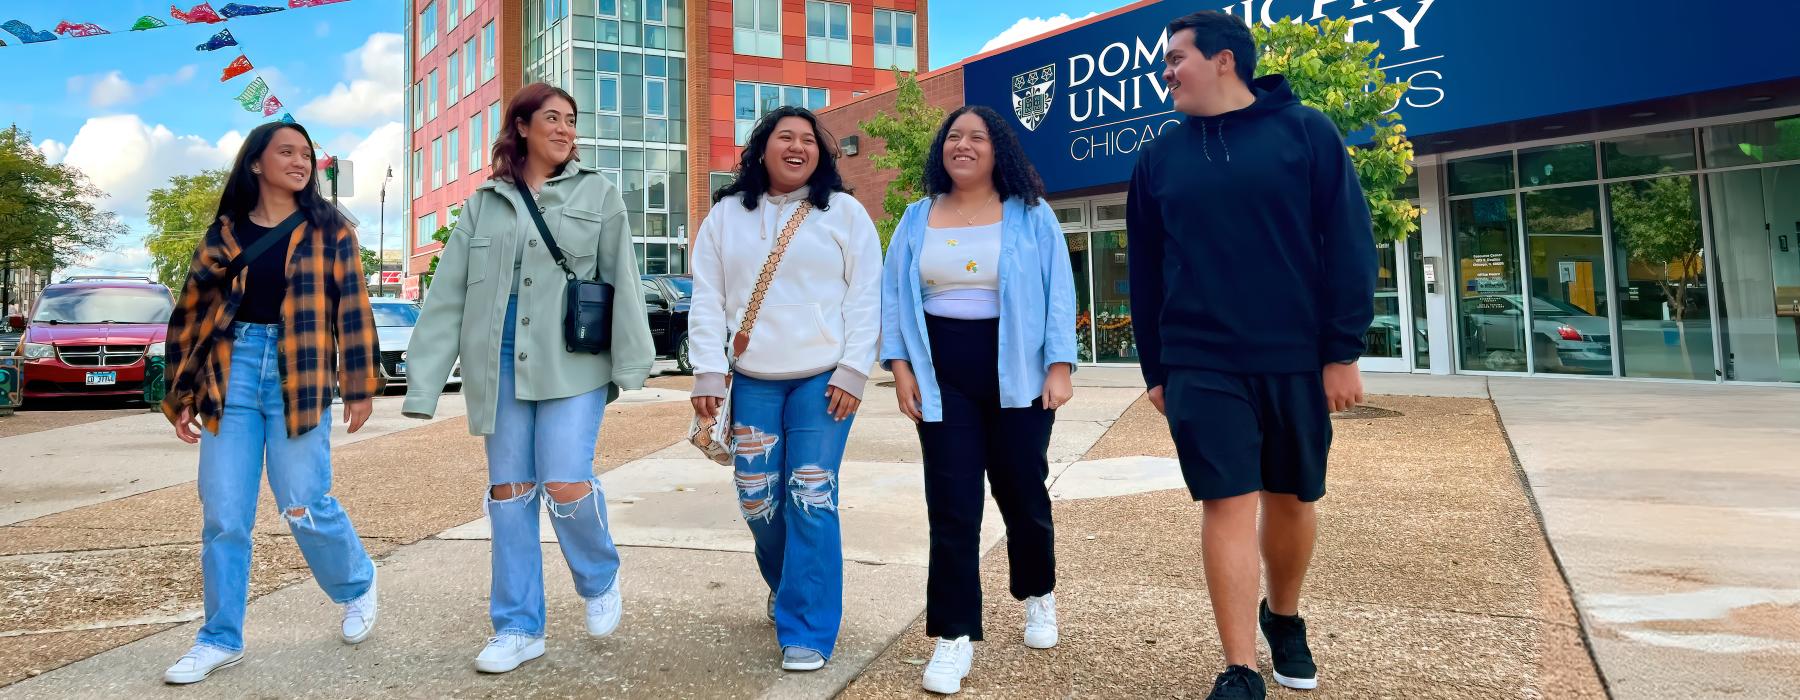 Students walking on Chicago Campus